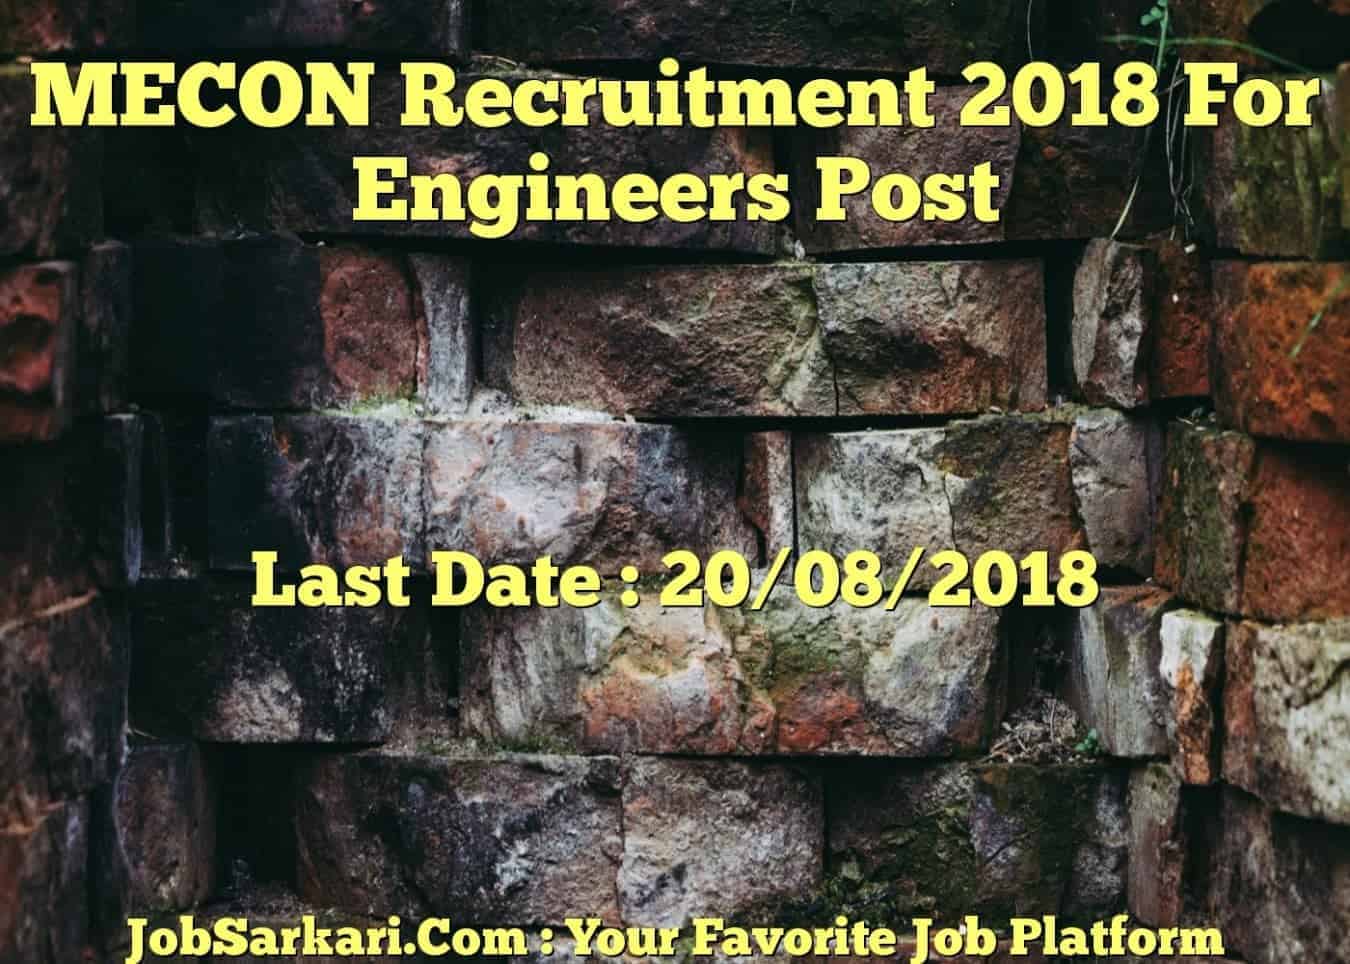 MECON Recruitment 2018 For Engineers Post